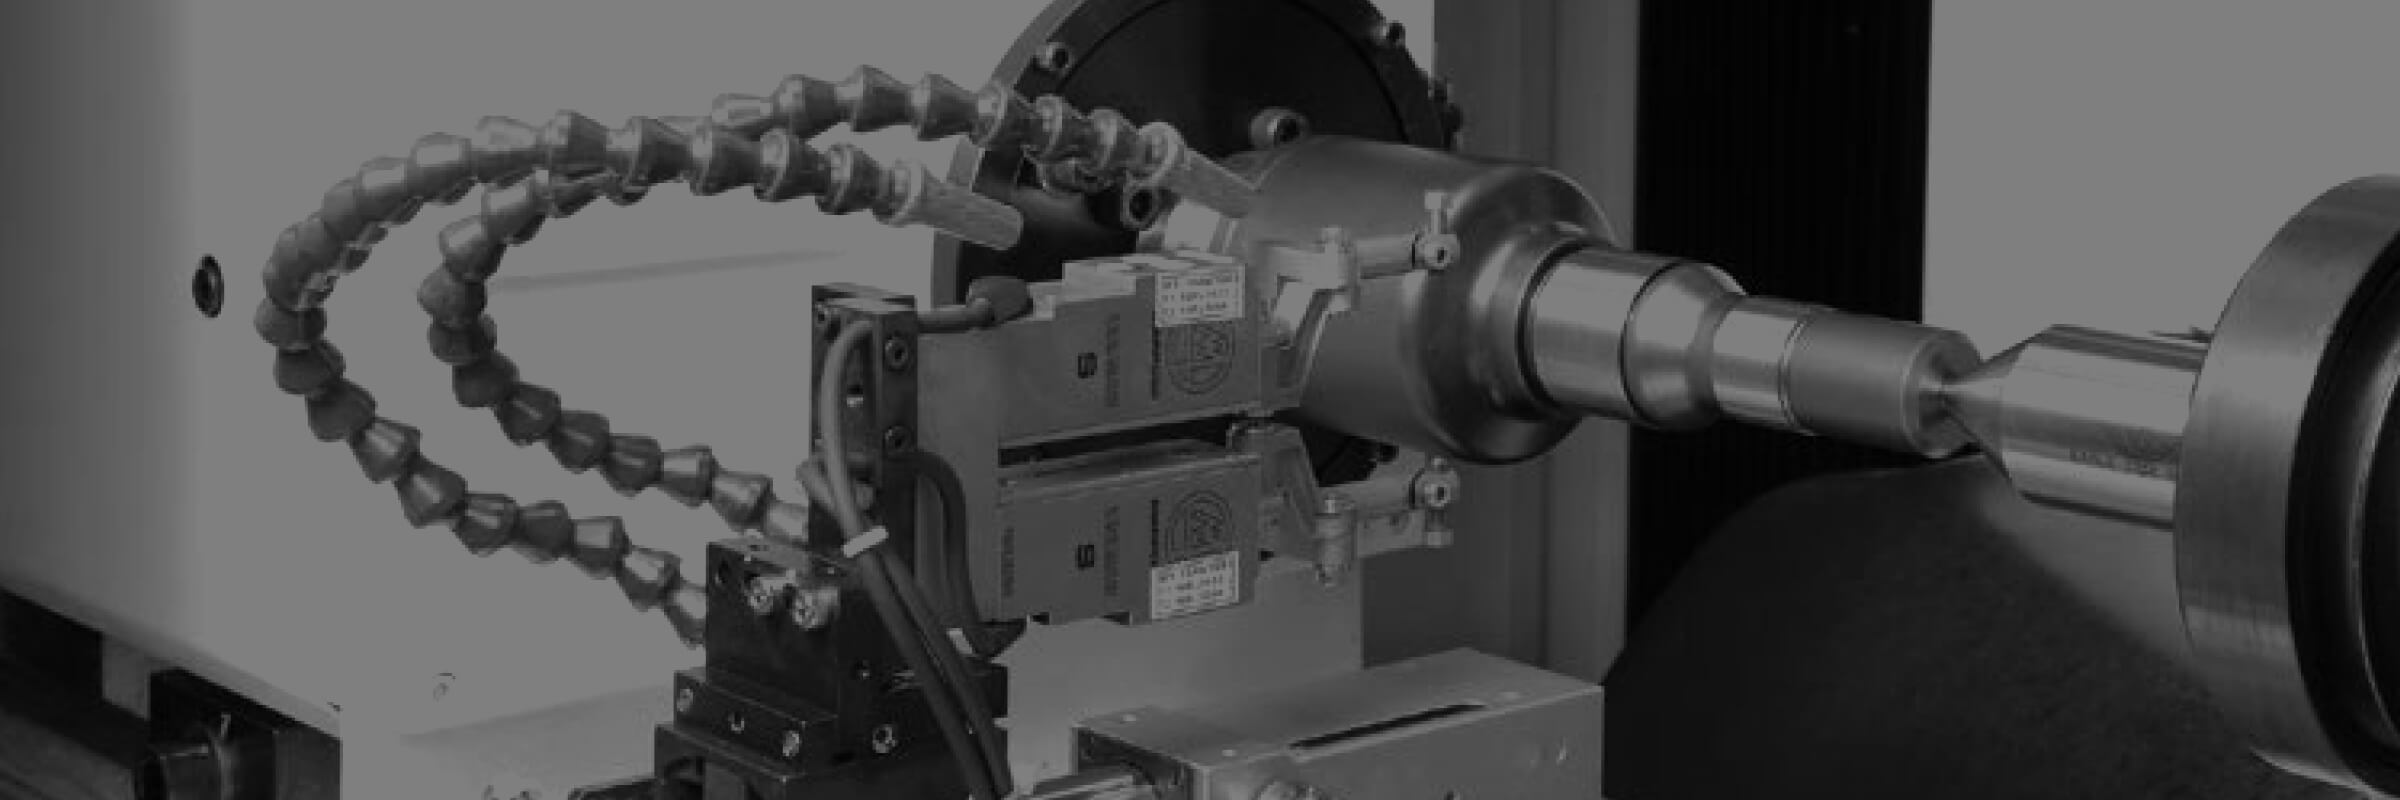 THE BENEFITS AND PERCEPTIONS OF A GRINDING MACHINE